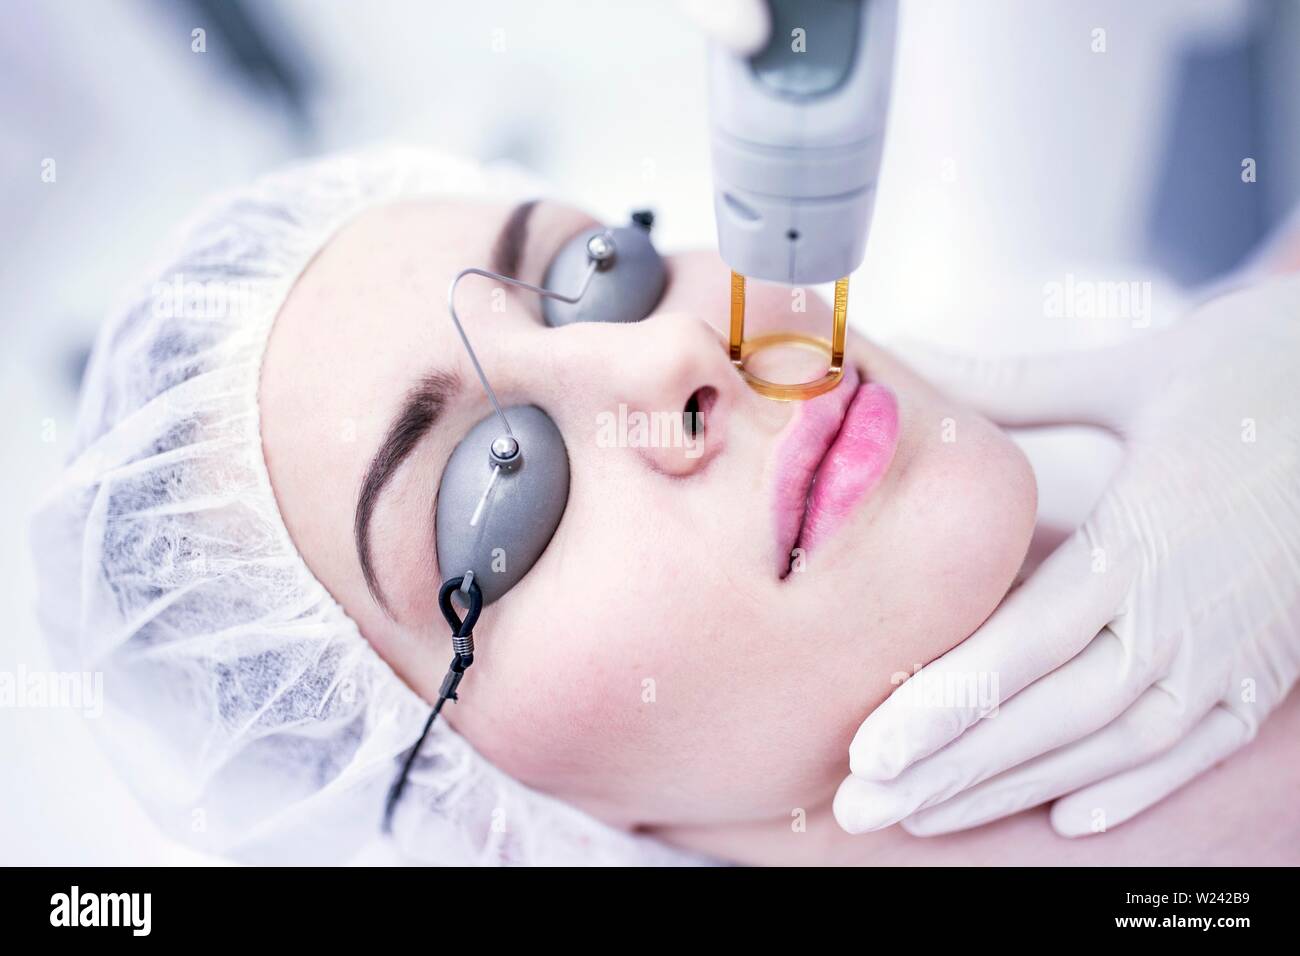 Young woman having laser hair removal treatment on face, close-up. Stock Photo